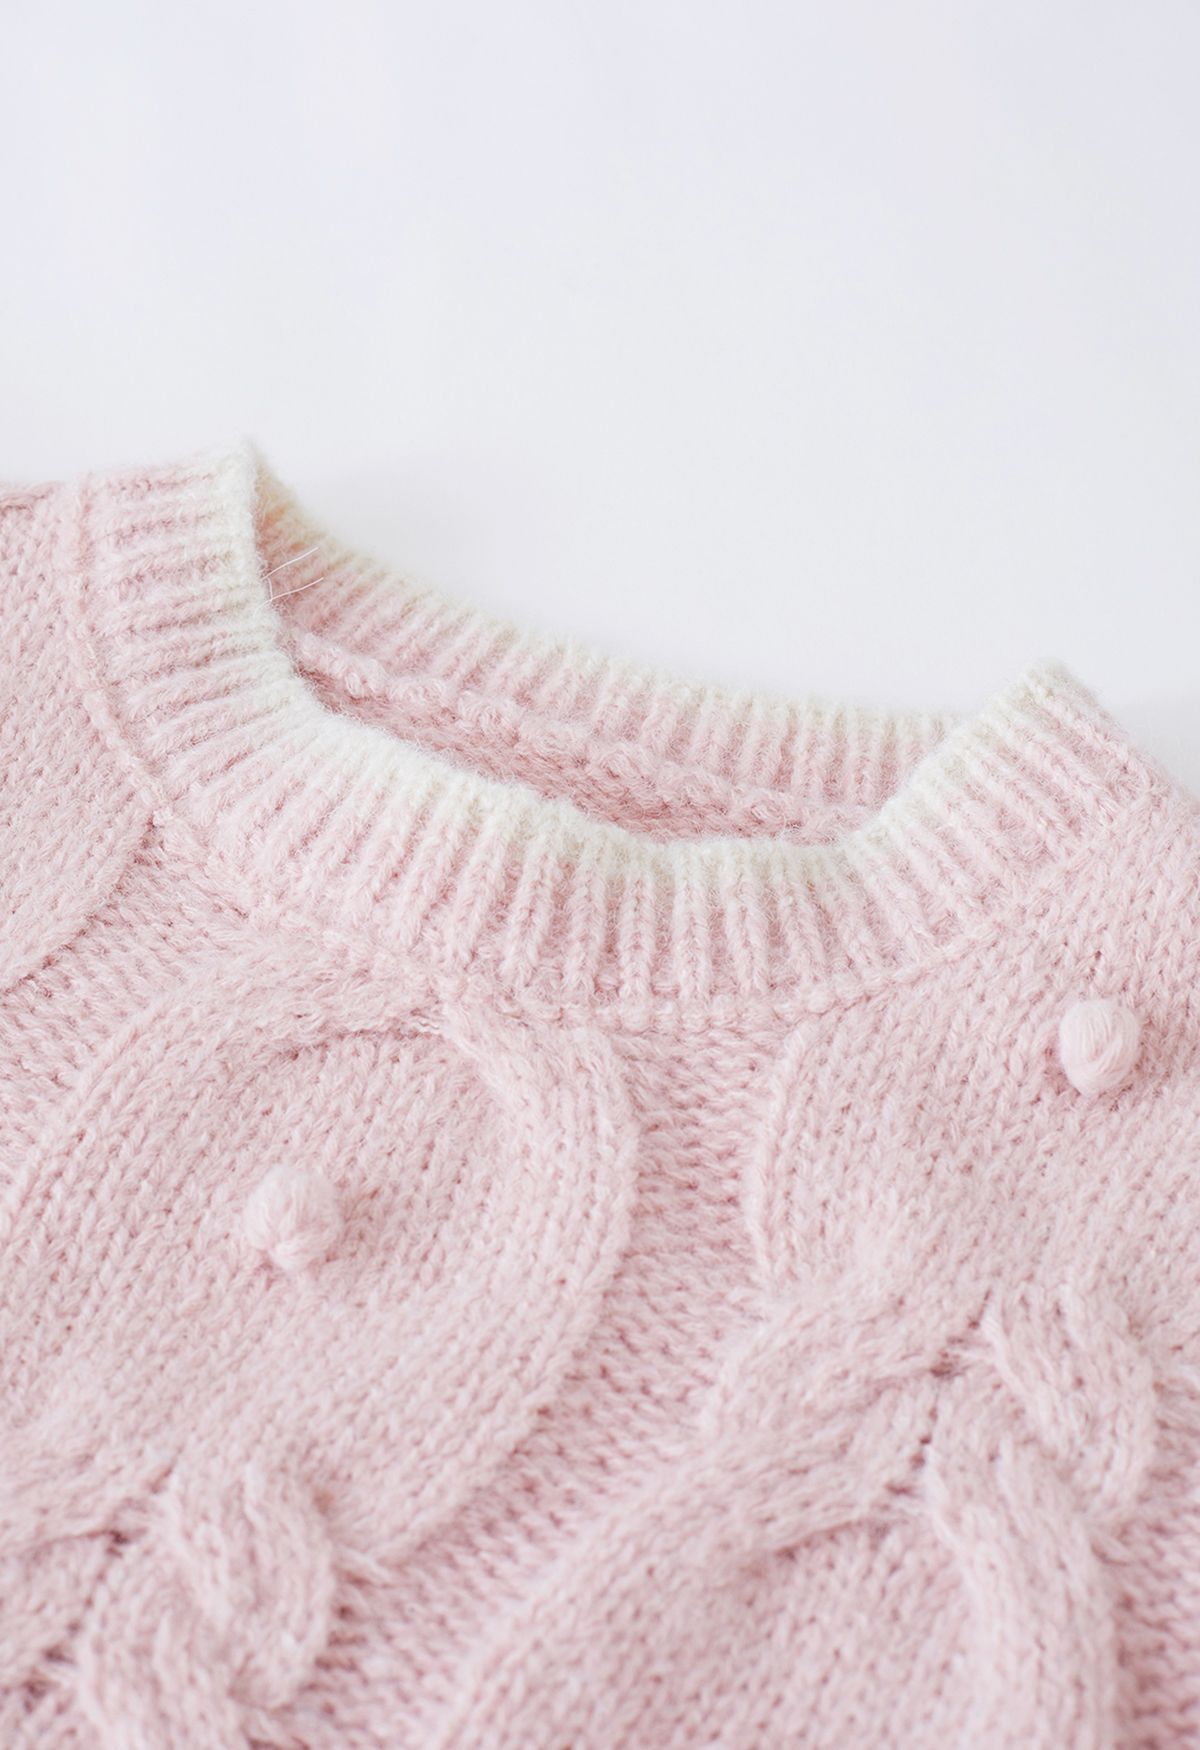 Contrast Edge Pom-Pom Cable Knit Sweater in Pink